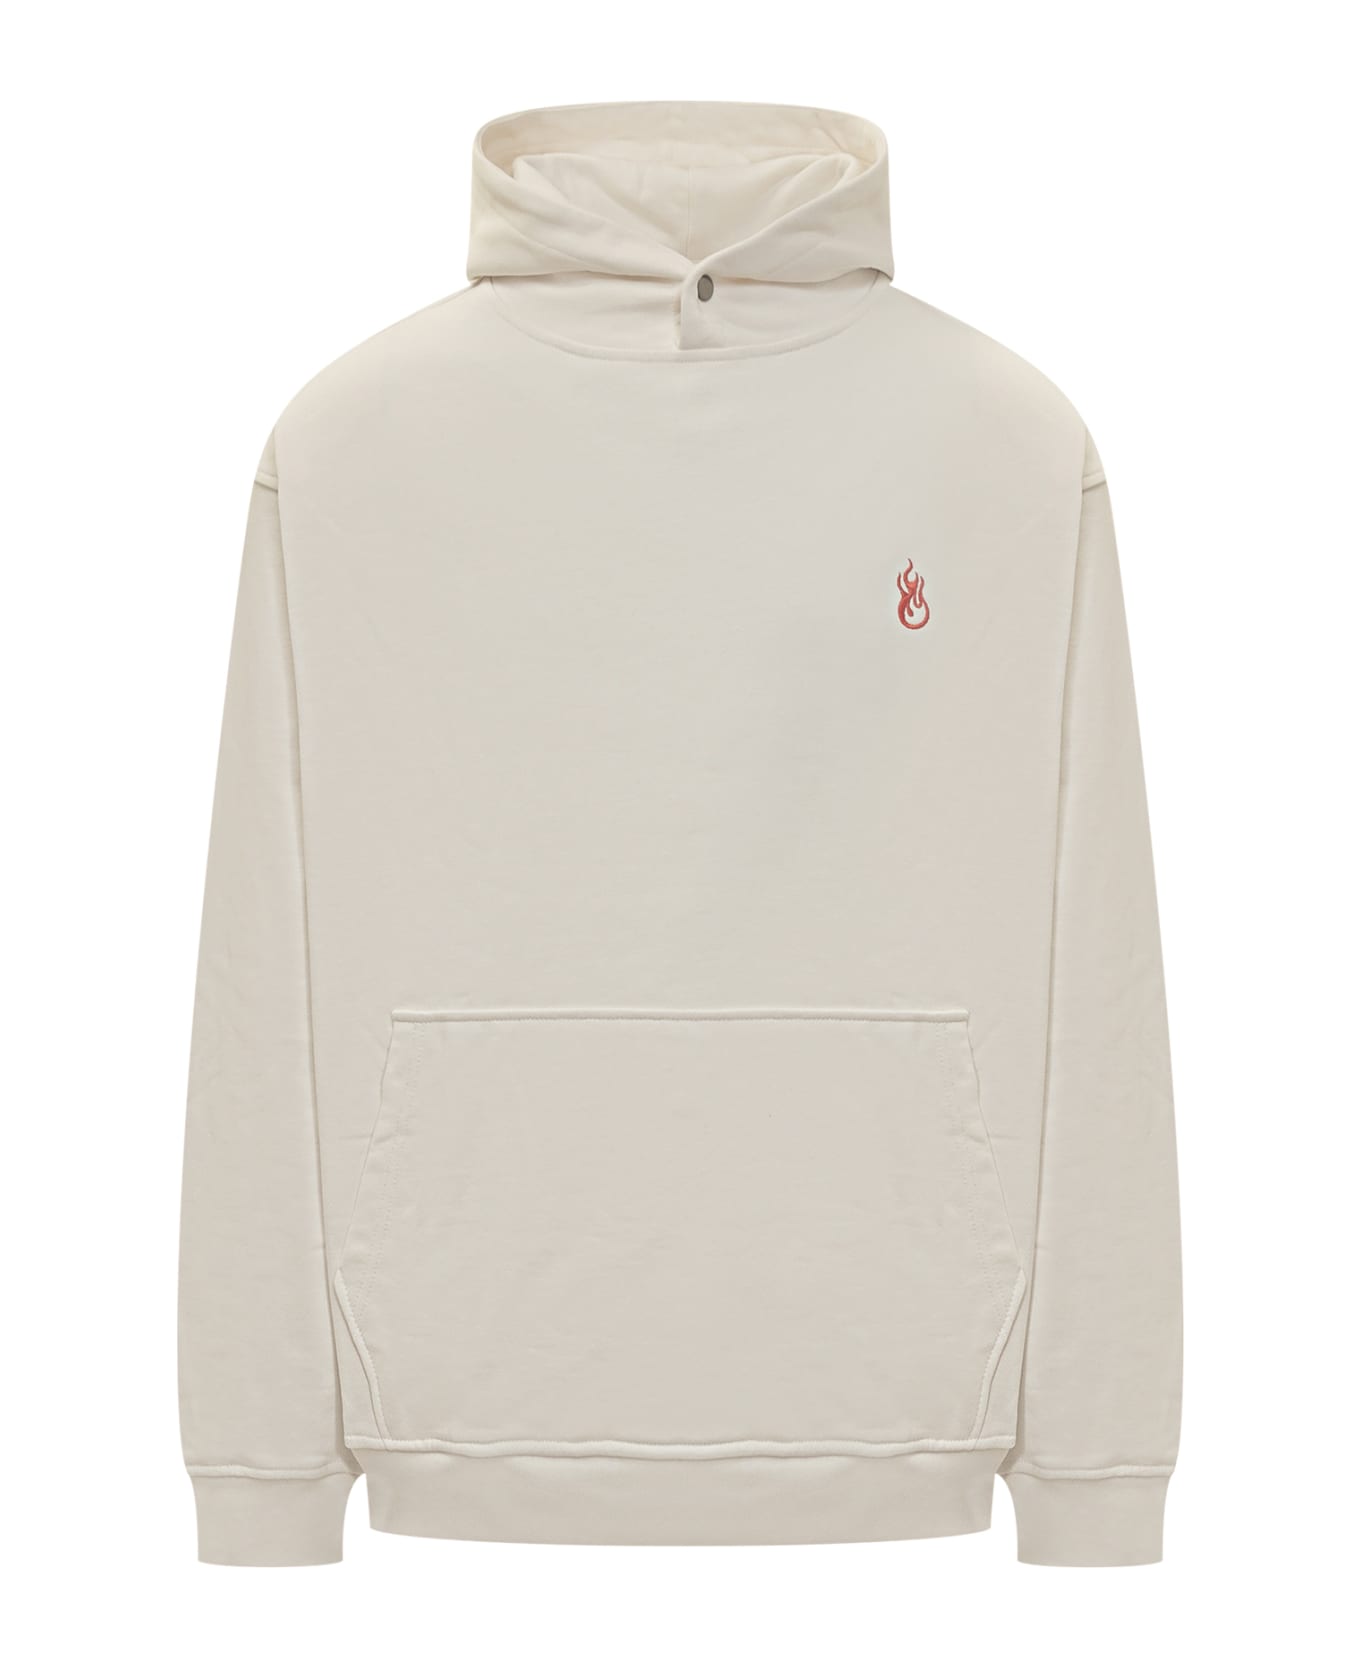 Vision of Super Flames Hoodie - White フリース